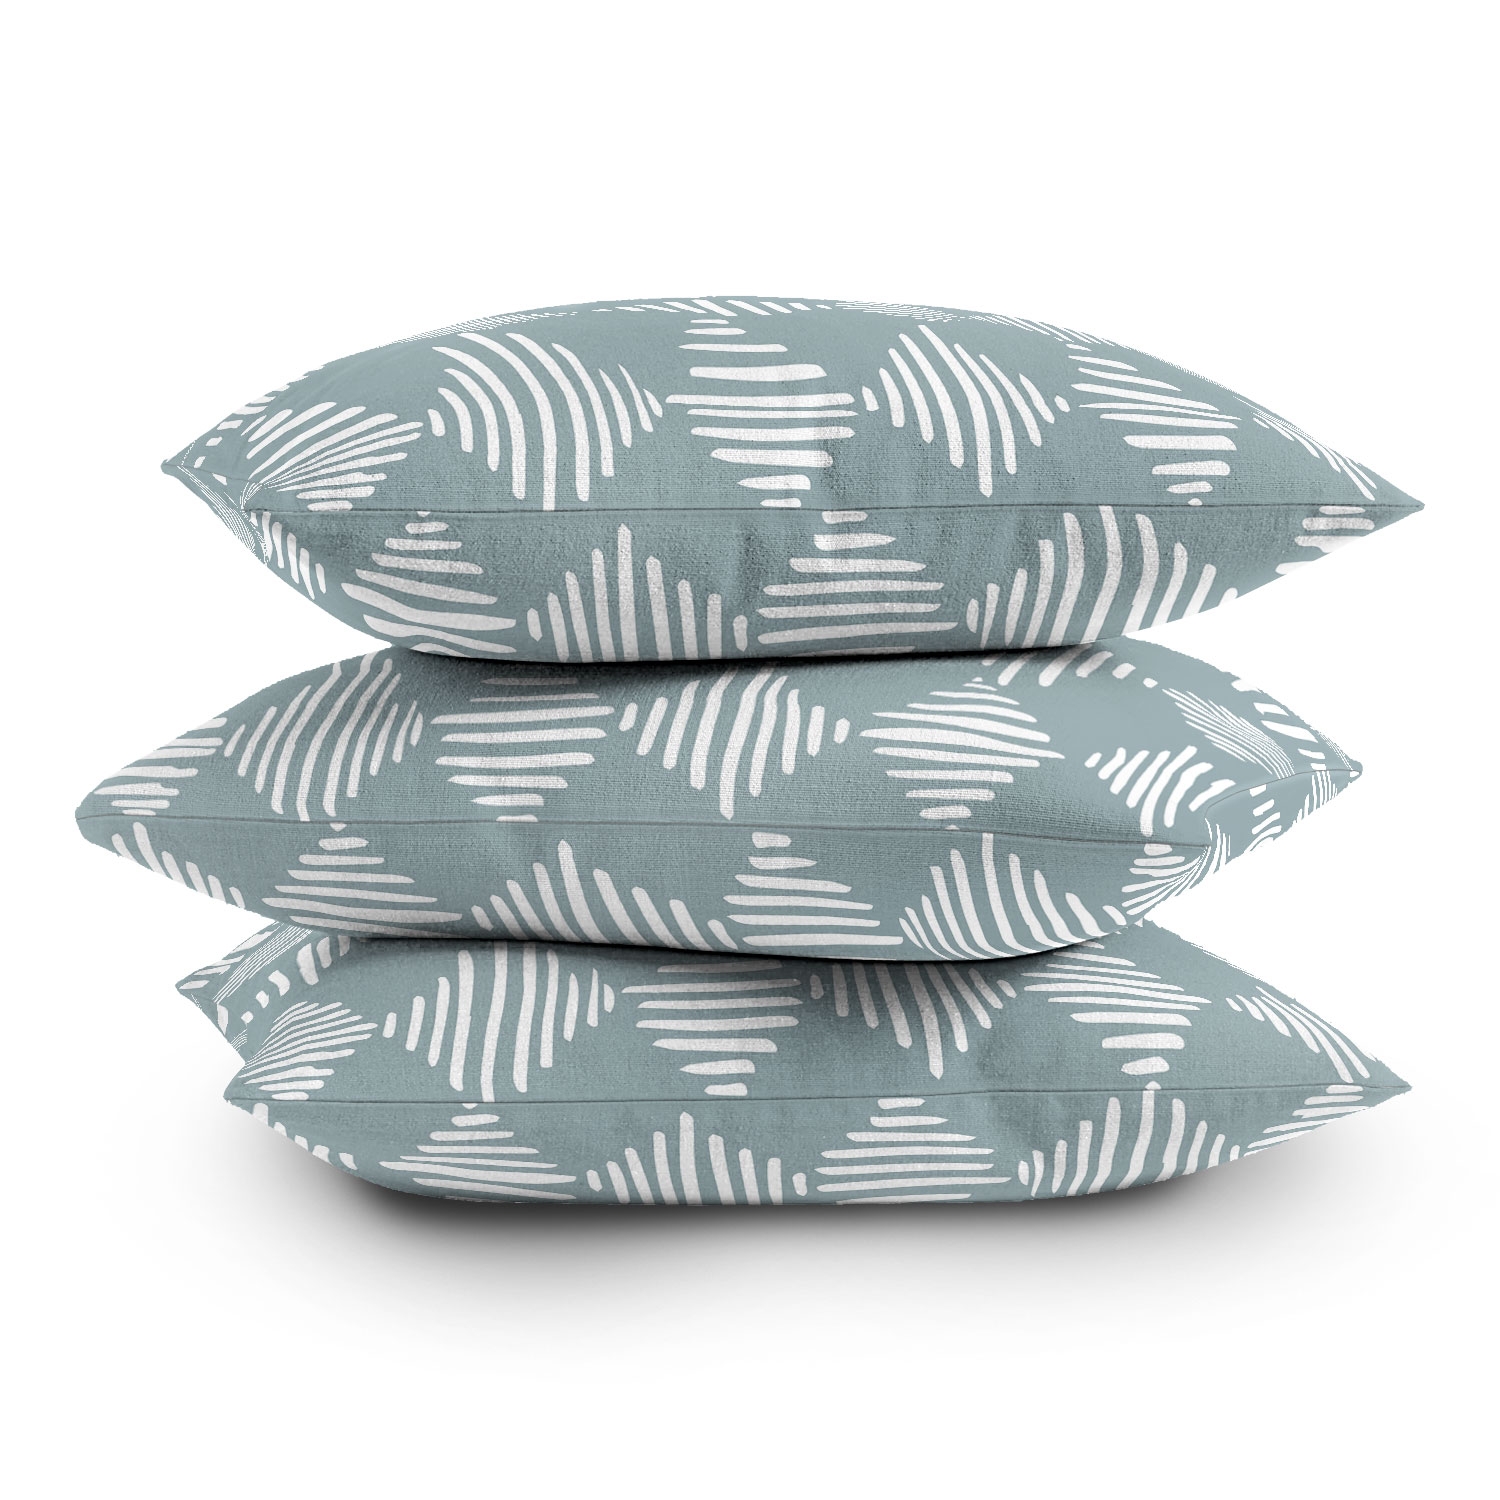 Sketches 1 by Mareike Boehmer - Outdoor Throw Pillow 20" x 20" - Image 1